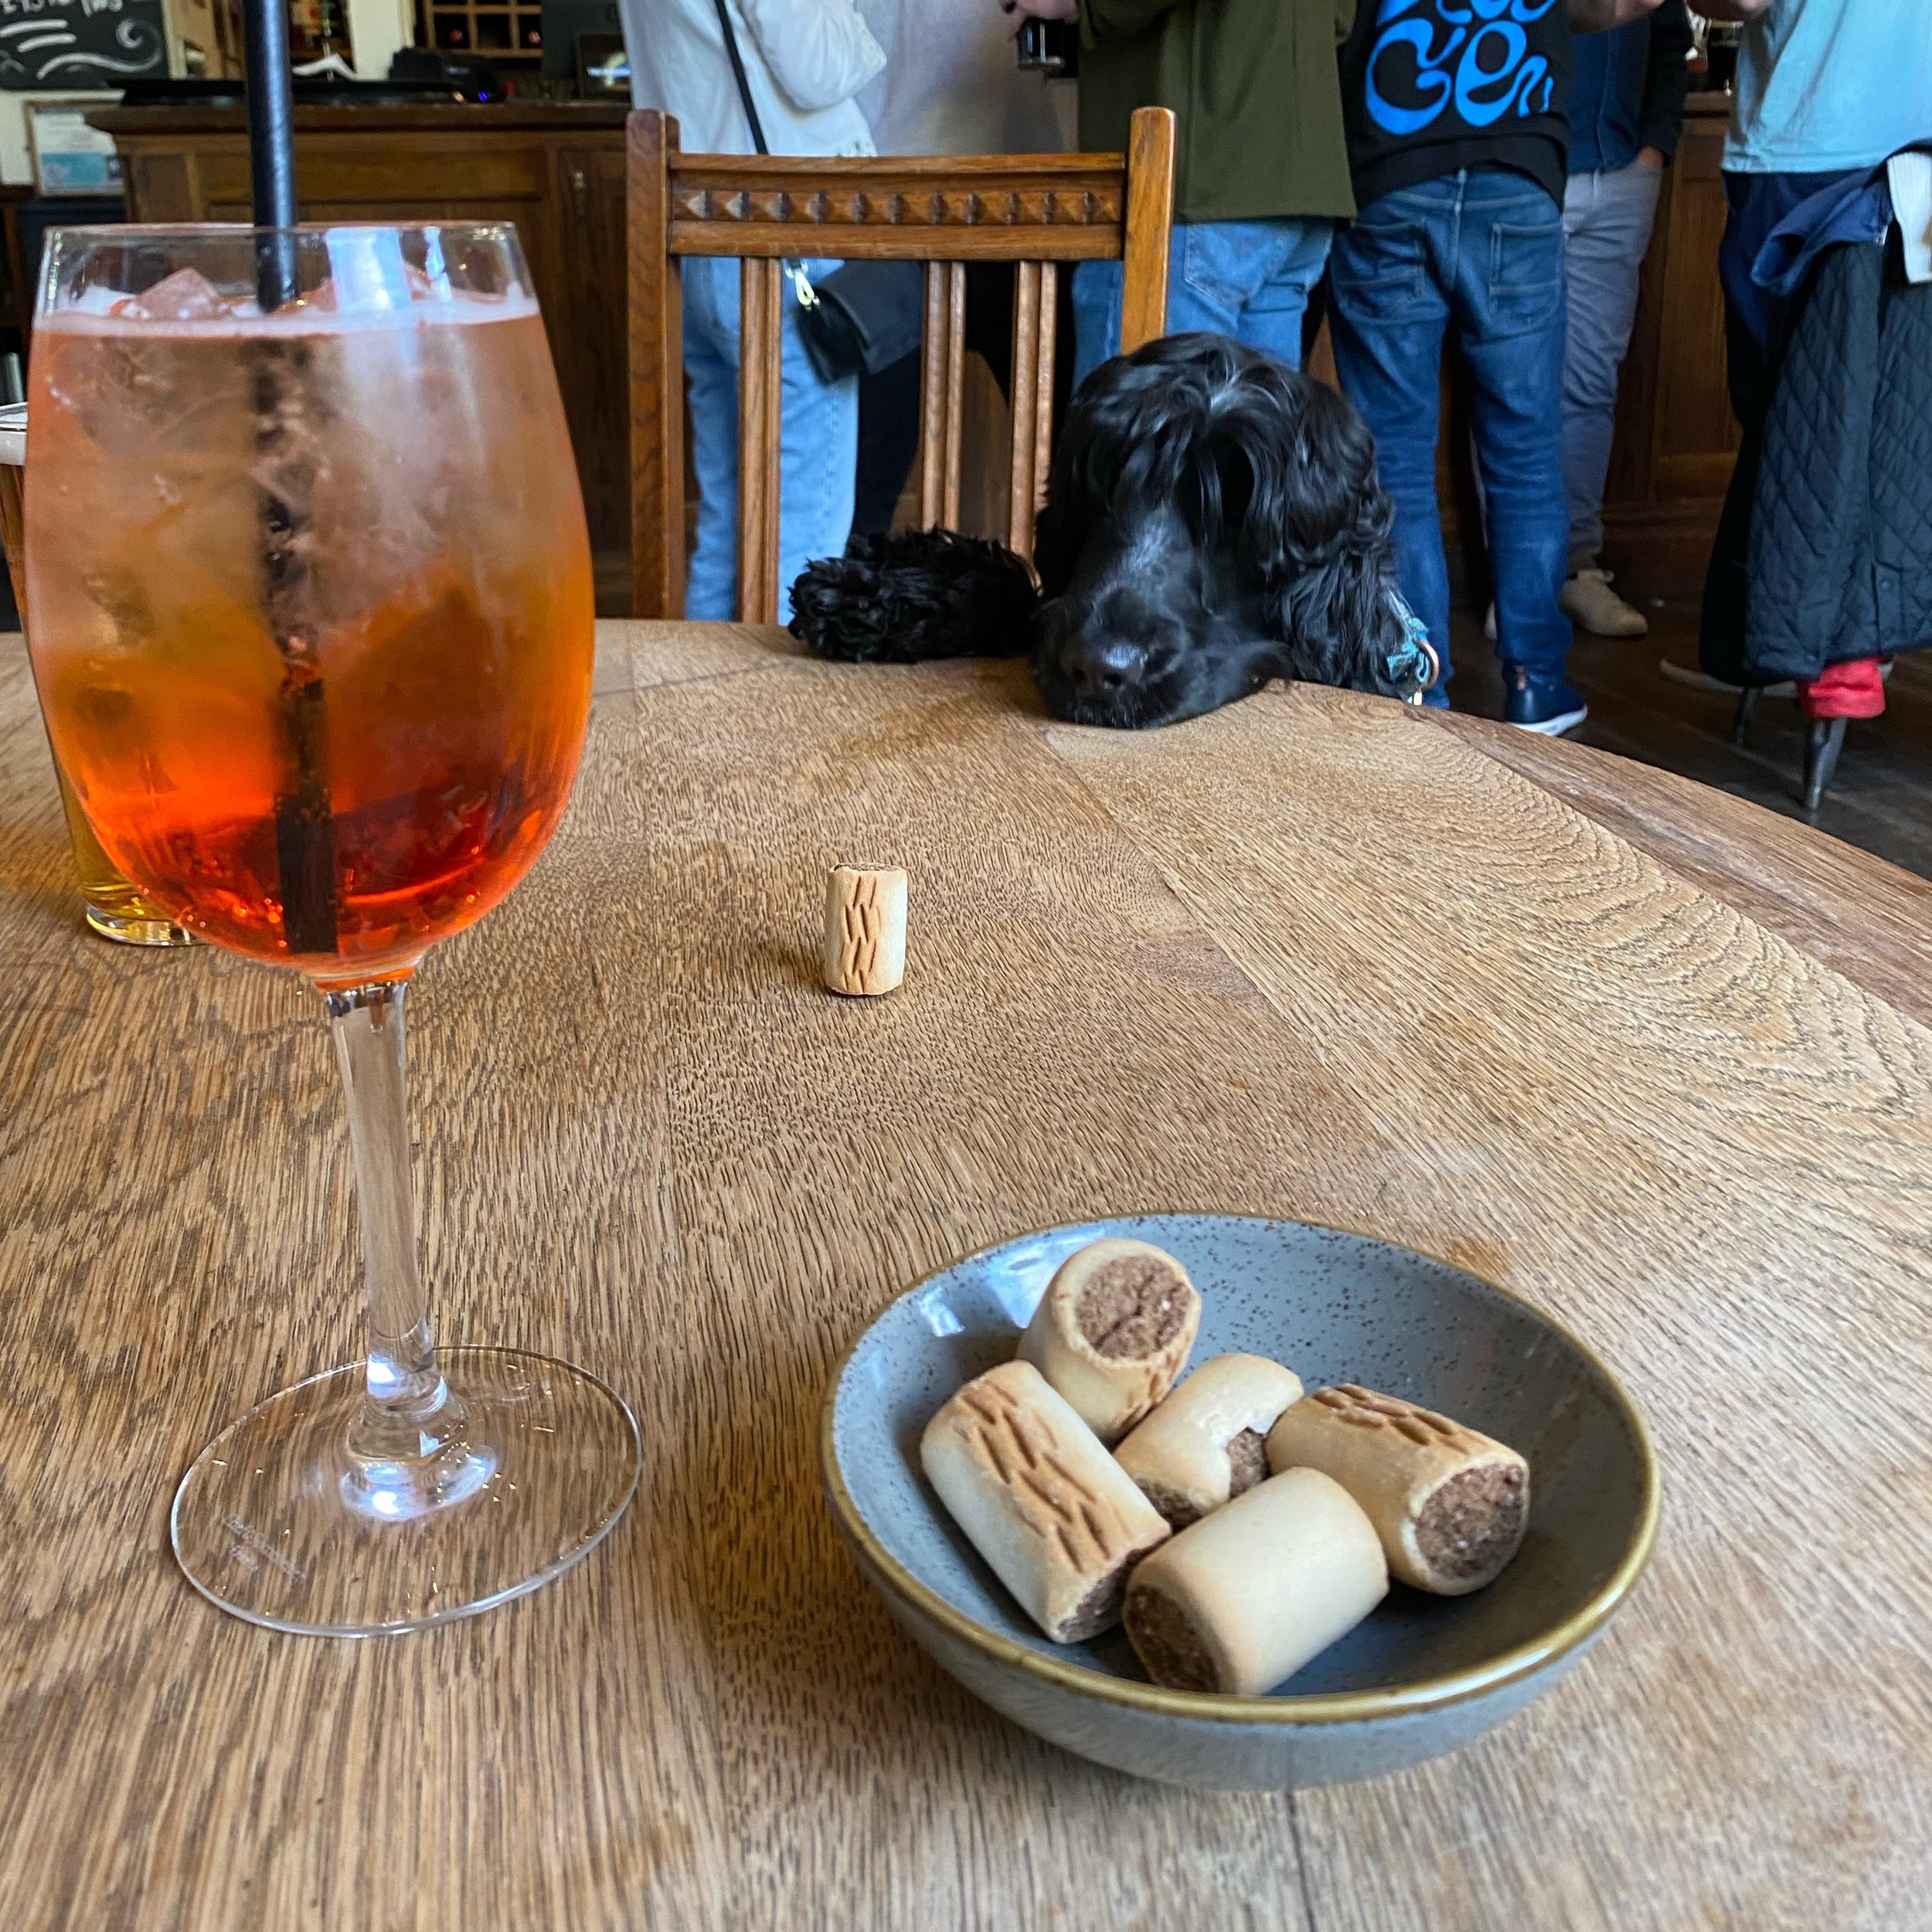 Saturday afternoon treat for Pepper and me.  Thank you @therosendalepub from @i.am.pepper.the.cocker.spaniel 

And yes @hound_and_co she&rsquo;s well overdue a visit. 

#iphonesnap #therosendale #westdulwich #dulwichdogs #arounddulwich #se21 #dulwich